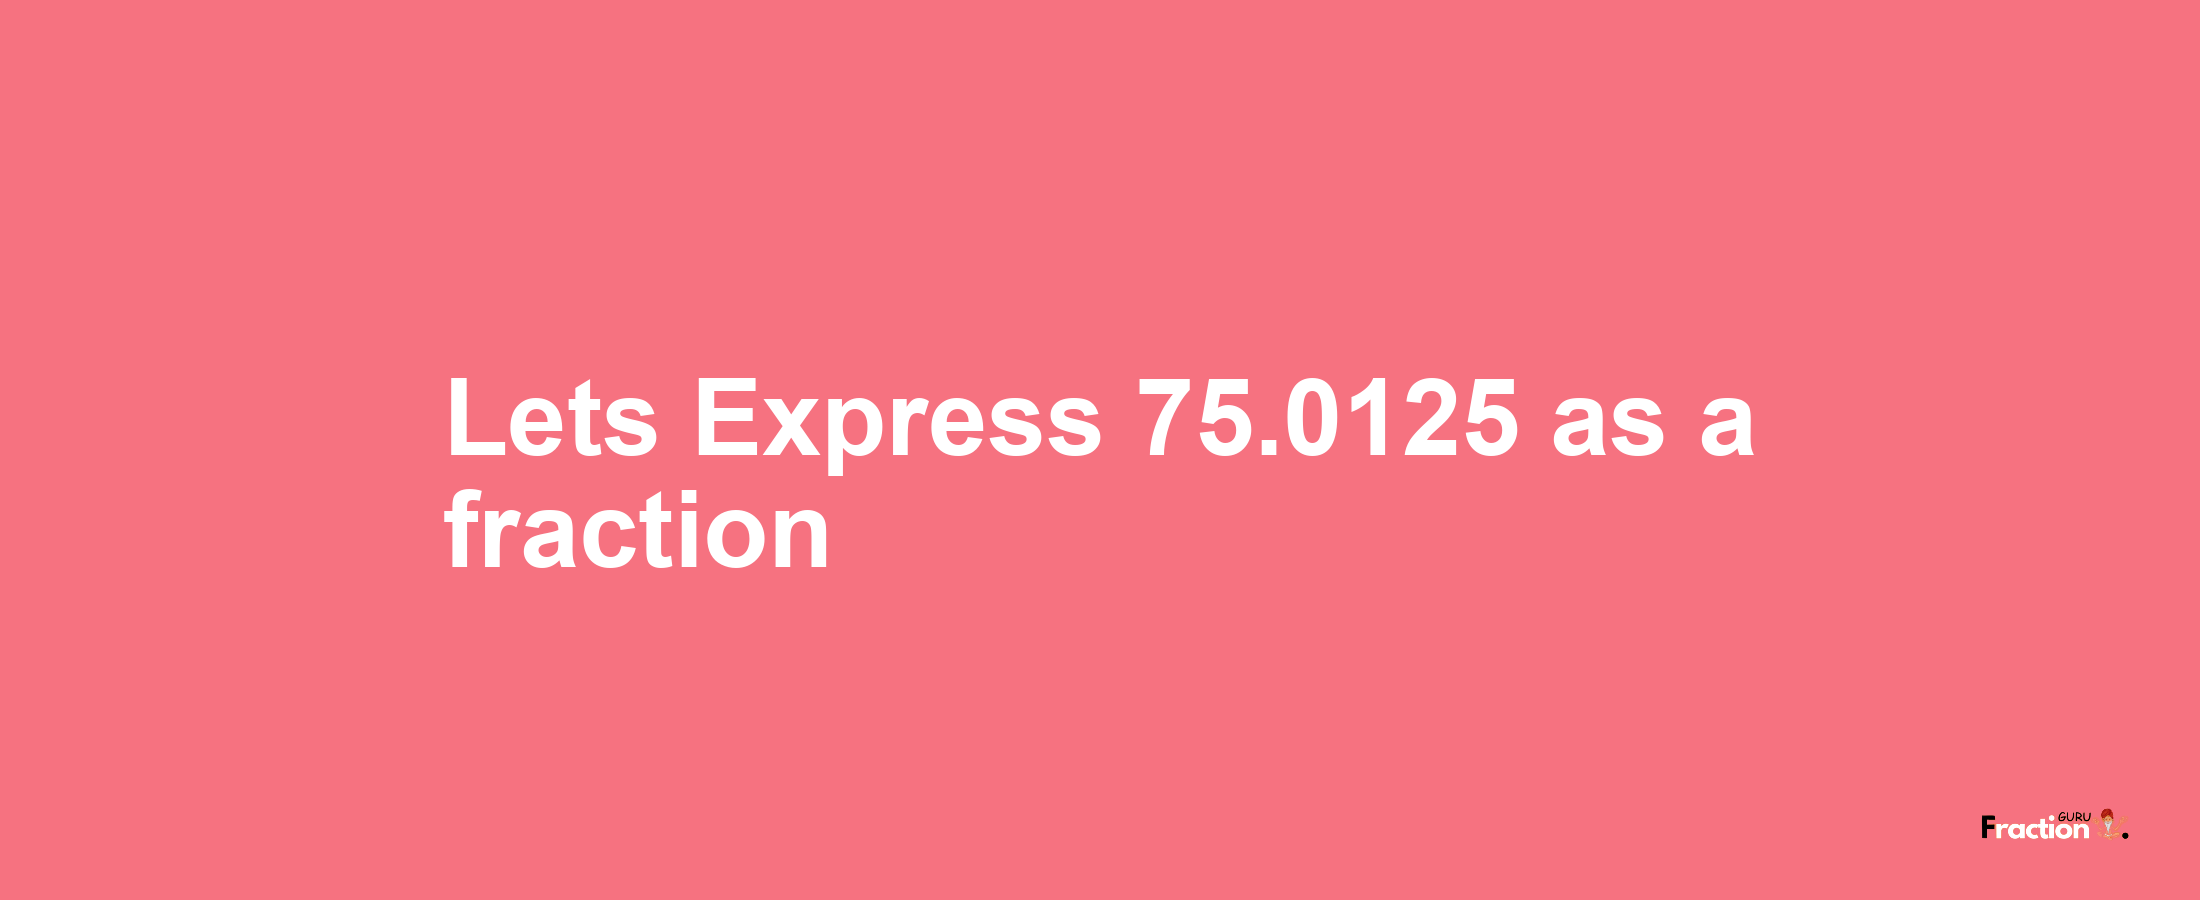 Lets Express 75.0125 as afraction